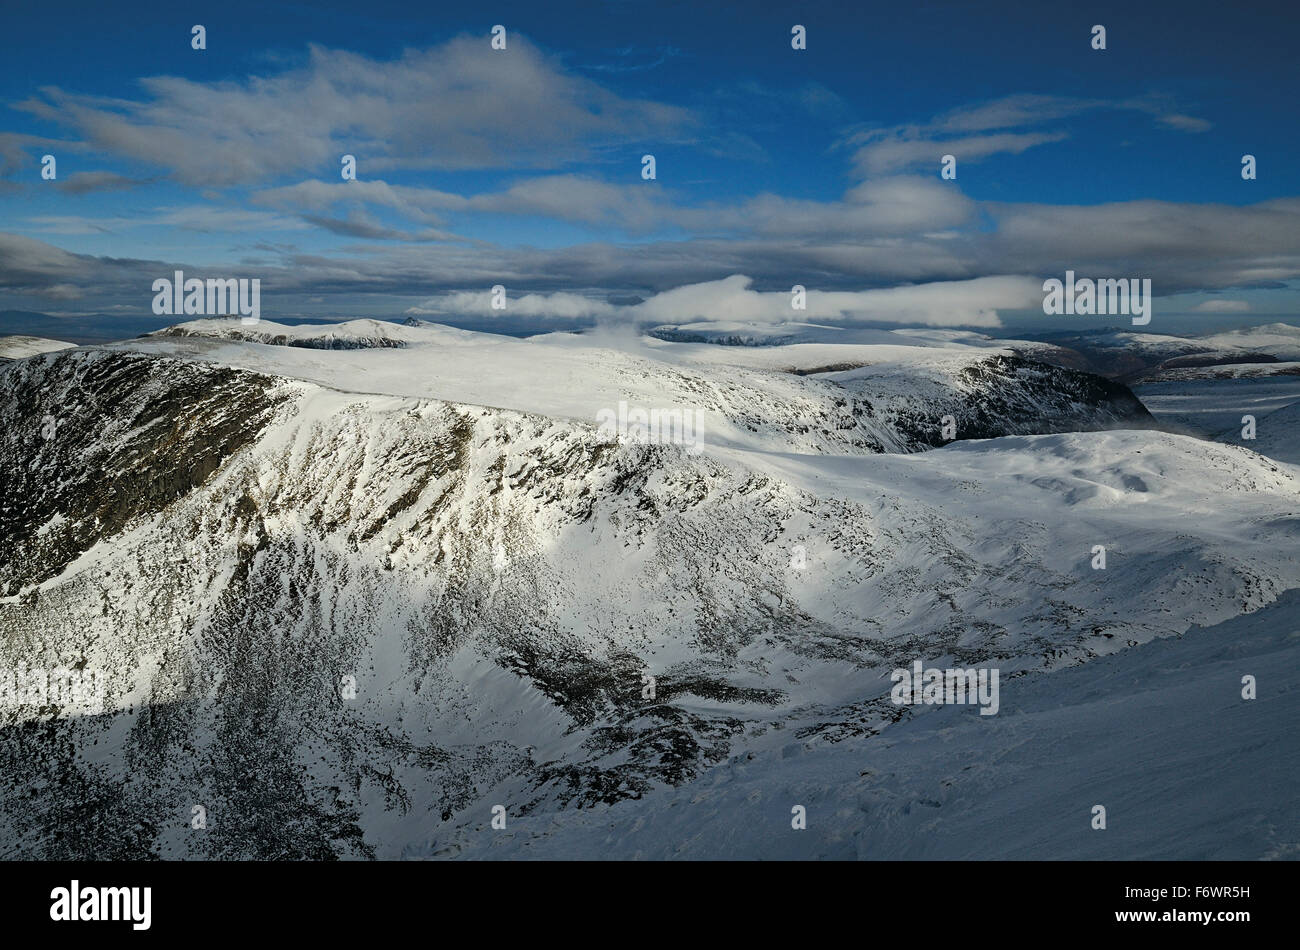 View from Beinn Dearg over snow-covered mountain scenery, Highlands, Scotland, Great Britain Stock Photo